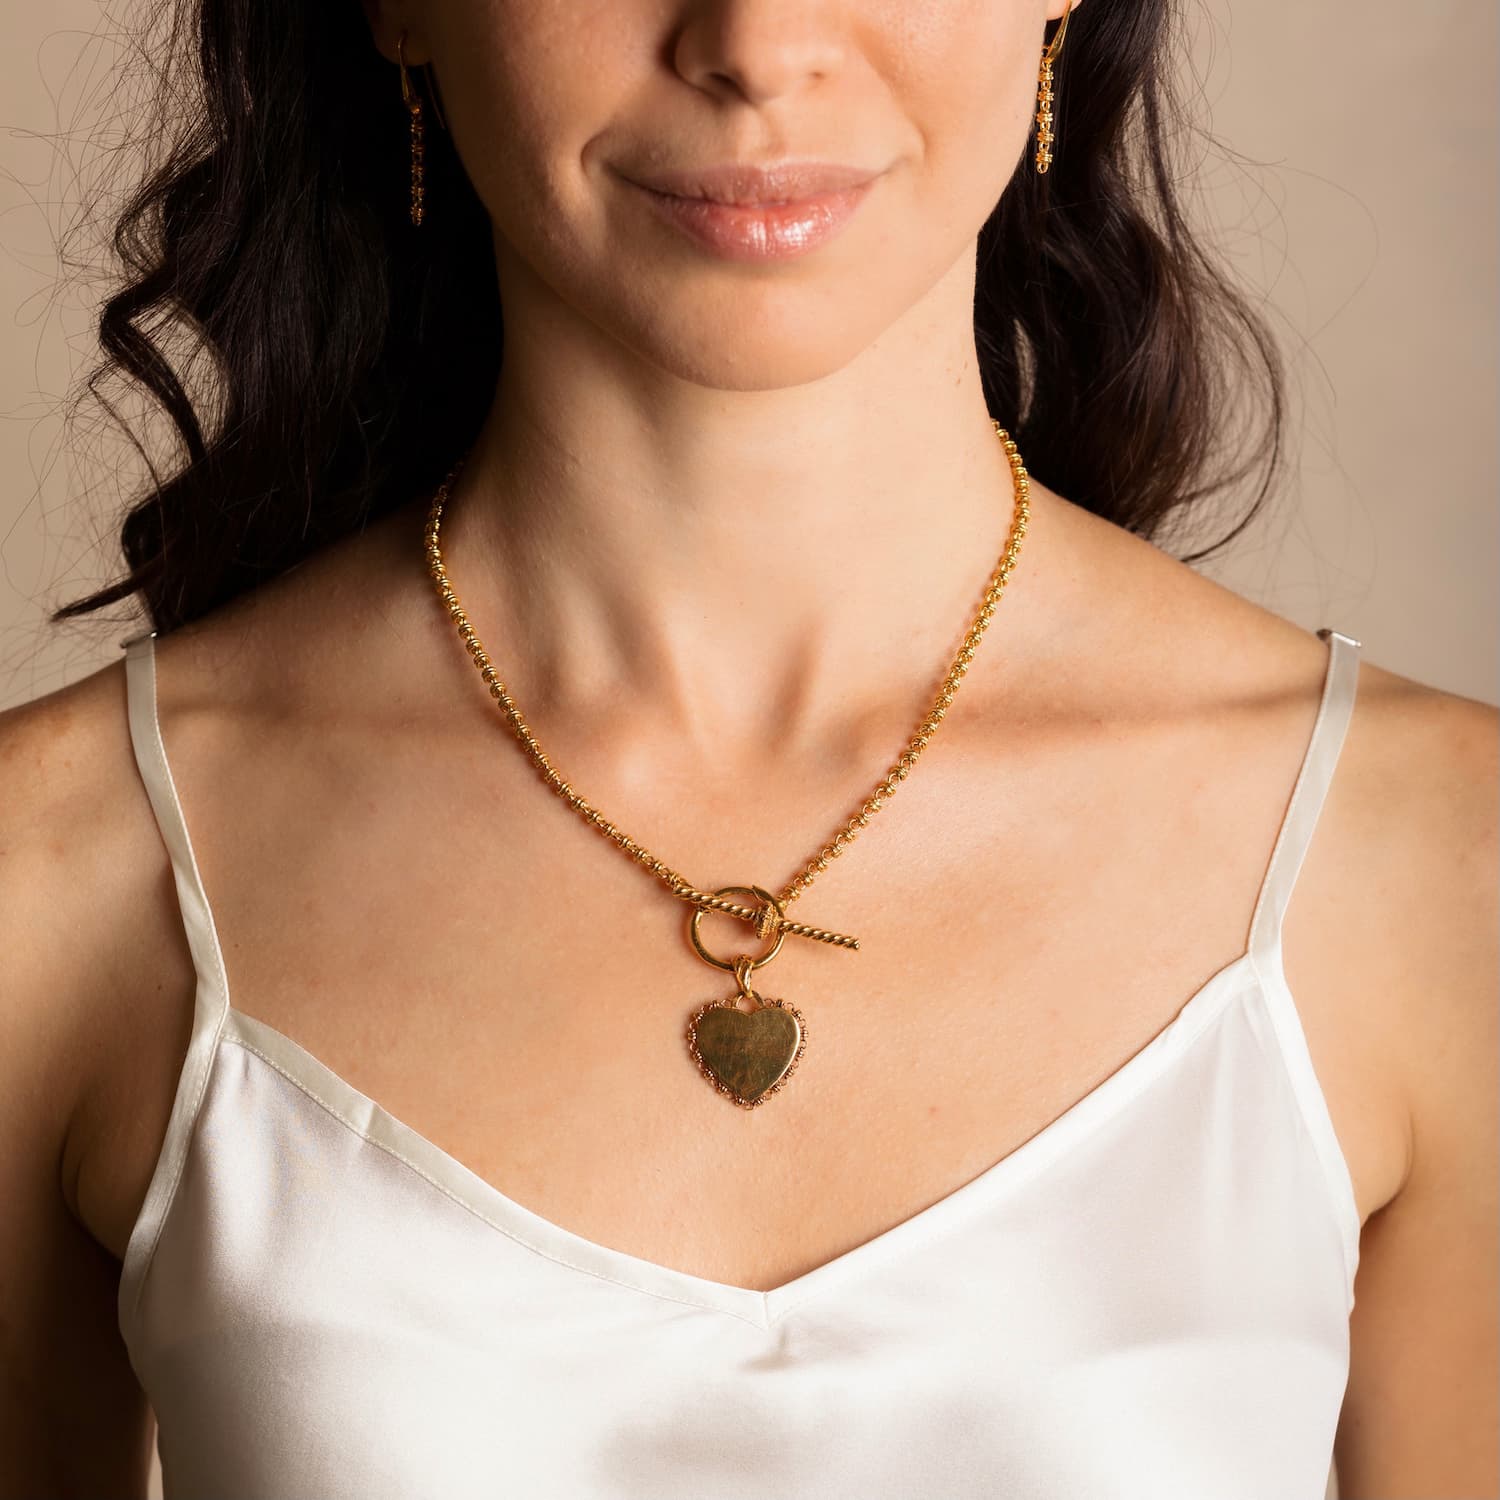 A model wearing a gold necklace with a toggle clasp with a gold heart pendant attached and gold earrings to match the gold chain in the necklace design - all are from the Links 3mm collection from DelBrenna Italian Jewelry designers and artisans. Hand-crafted in Tuscany.